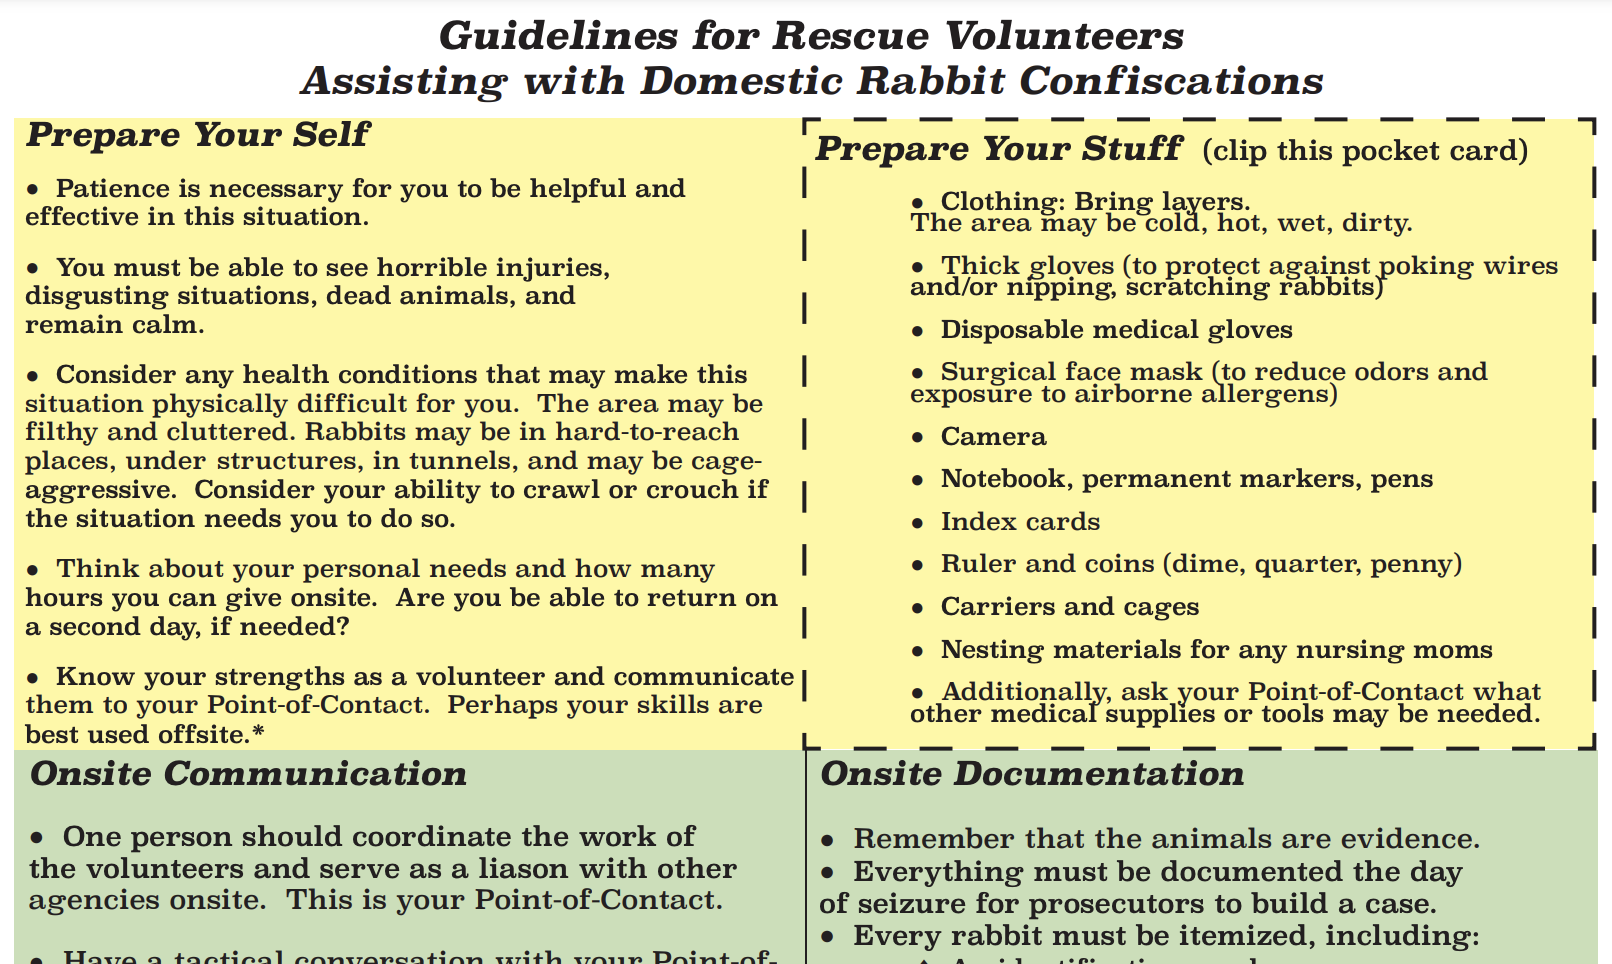 Guidelines for Rescue Volunteers Assisting with Domestic Rabbit Confiscations